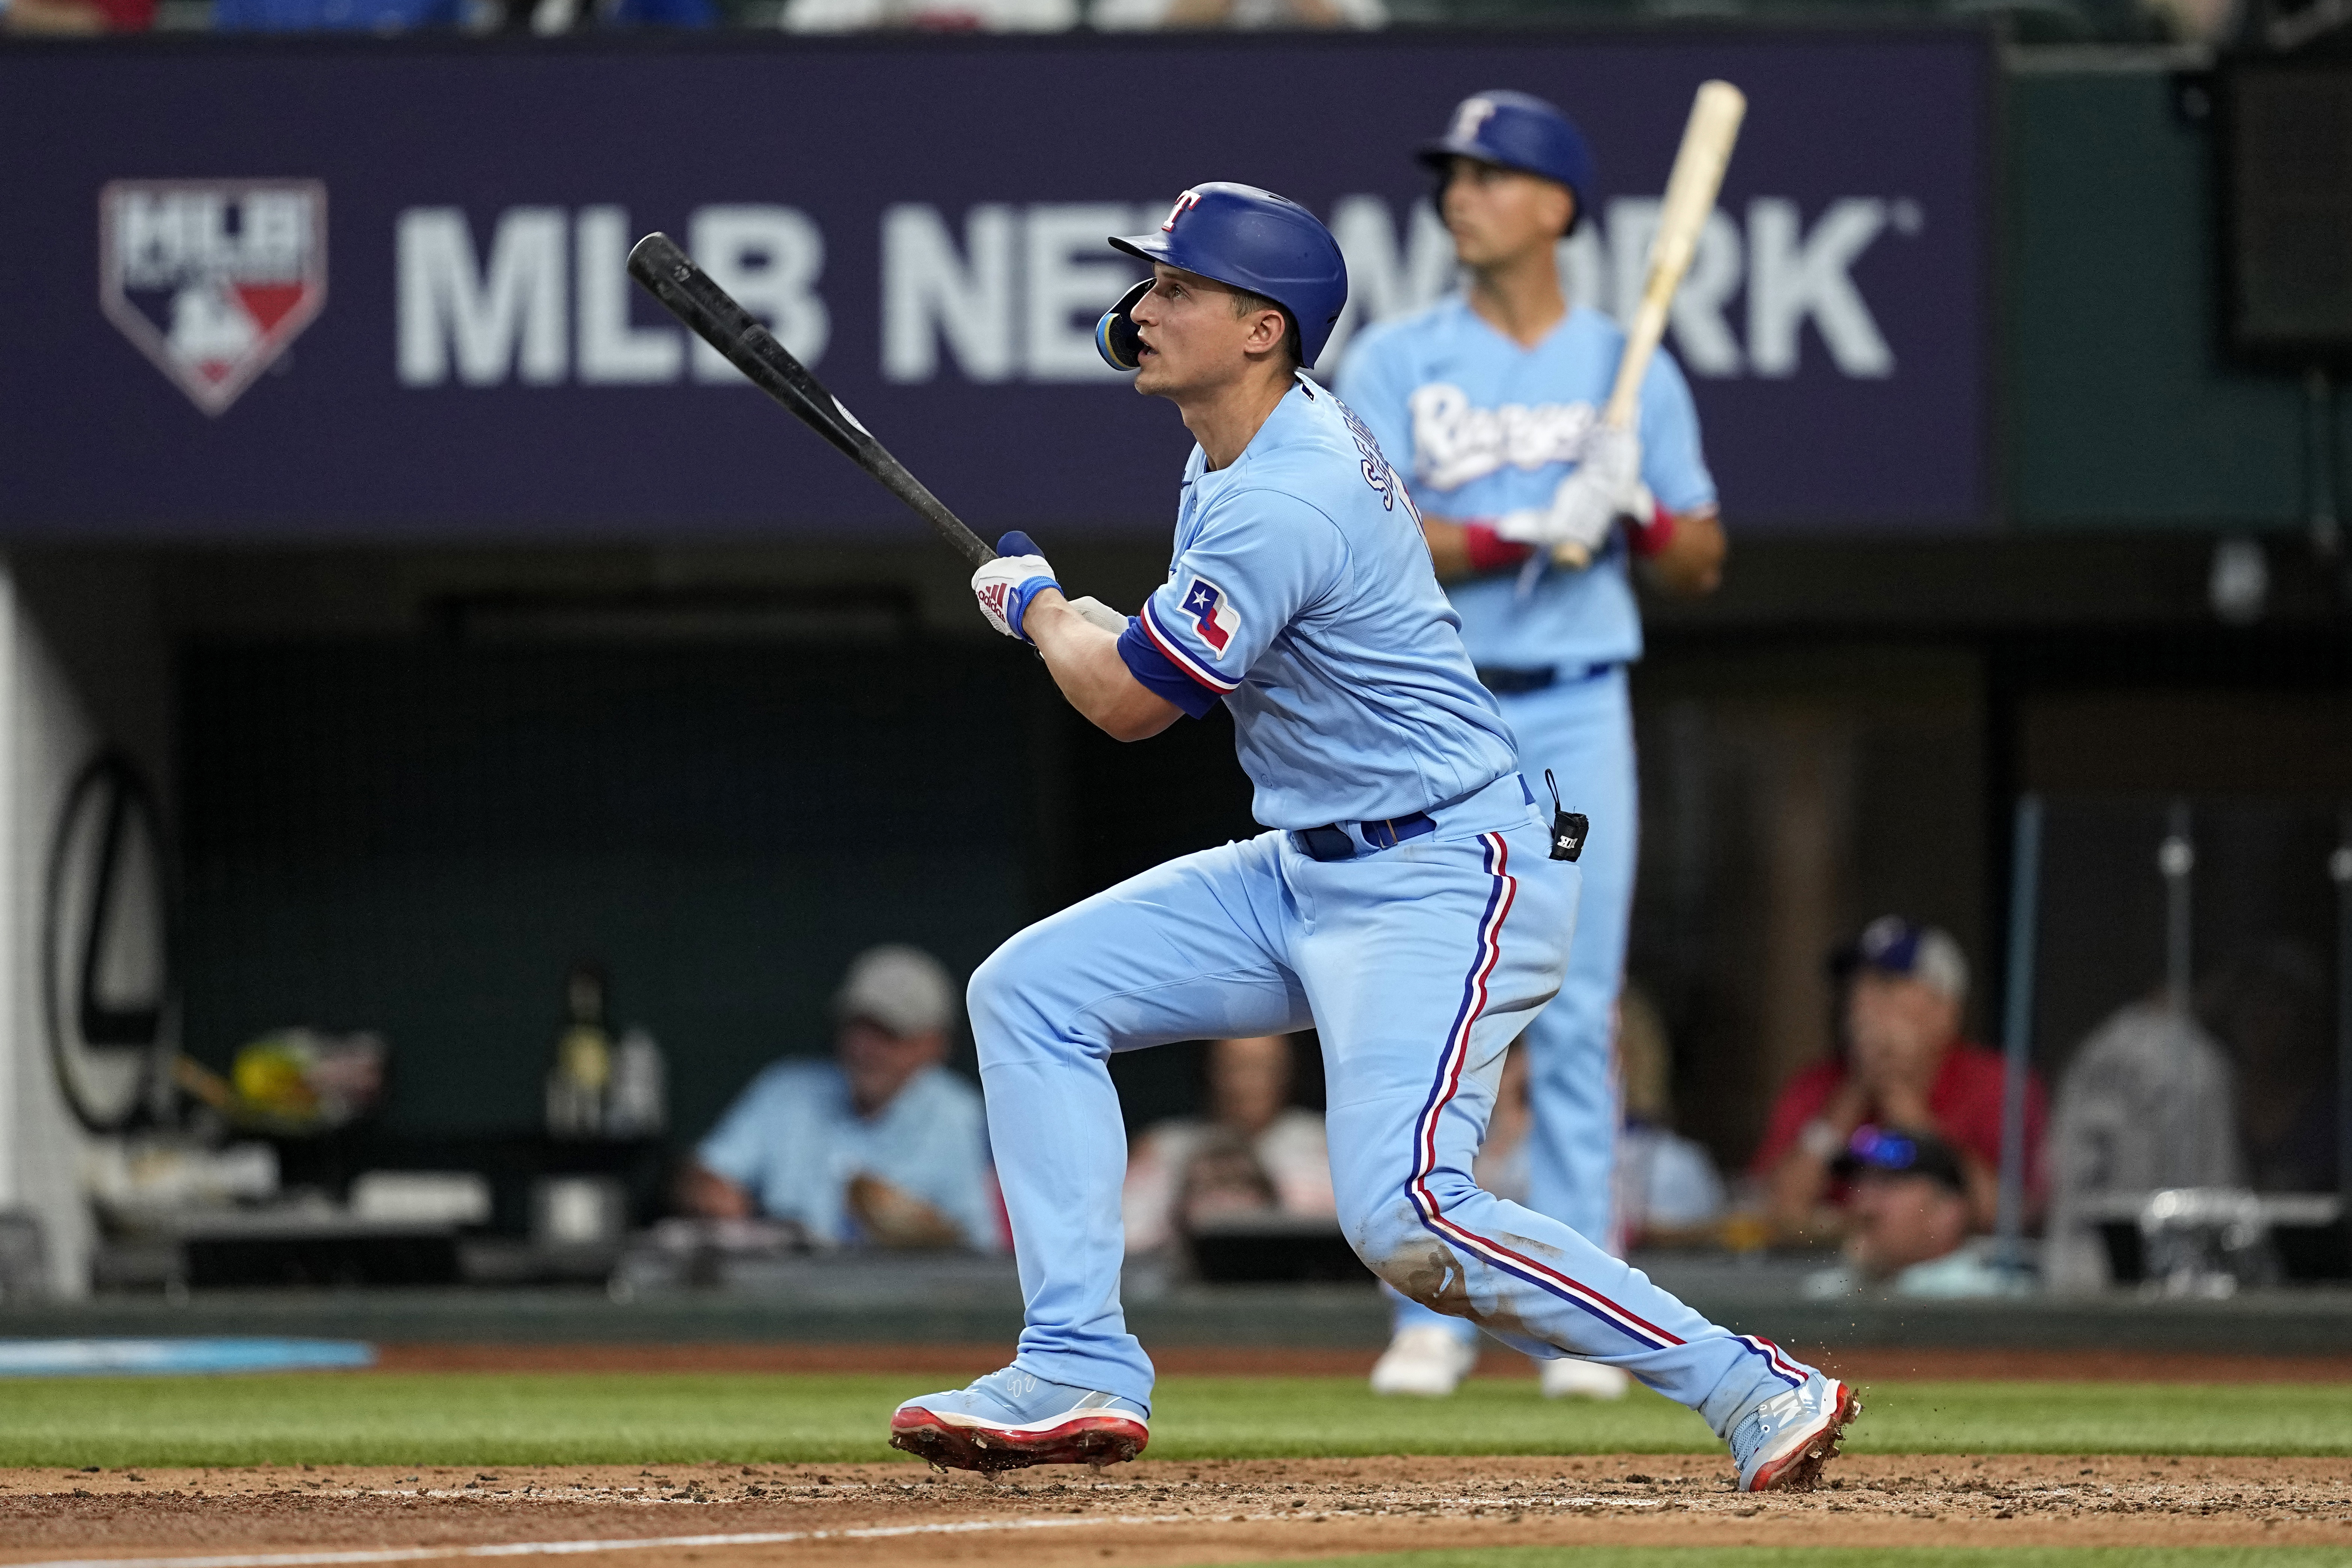 Corey Seager Named Texas Rangers Player of Month for June - Sports